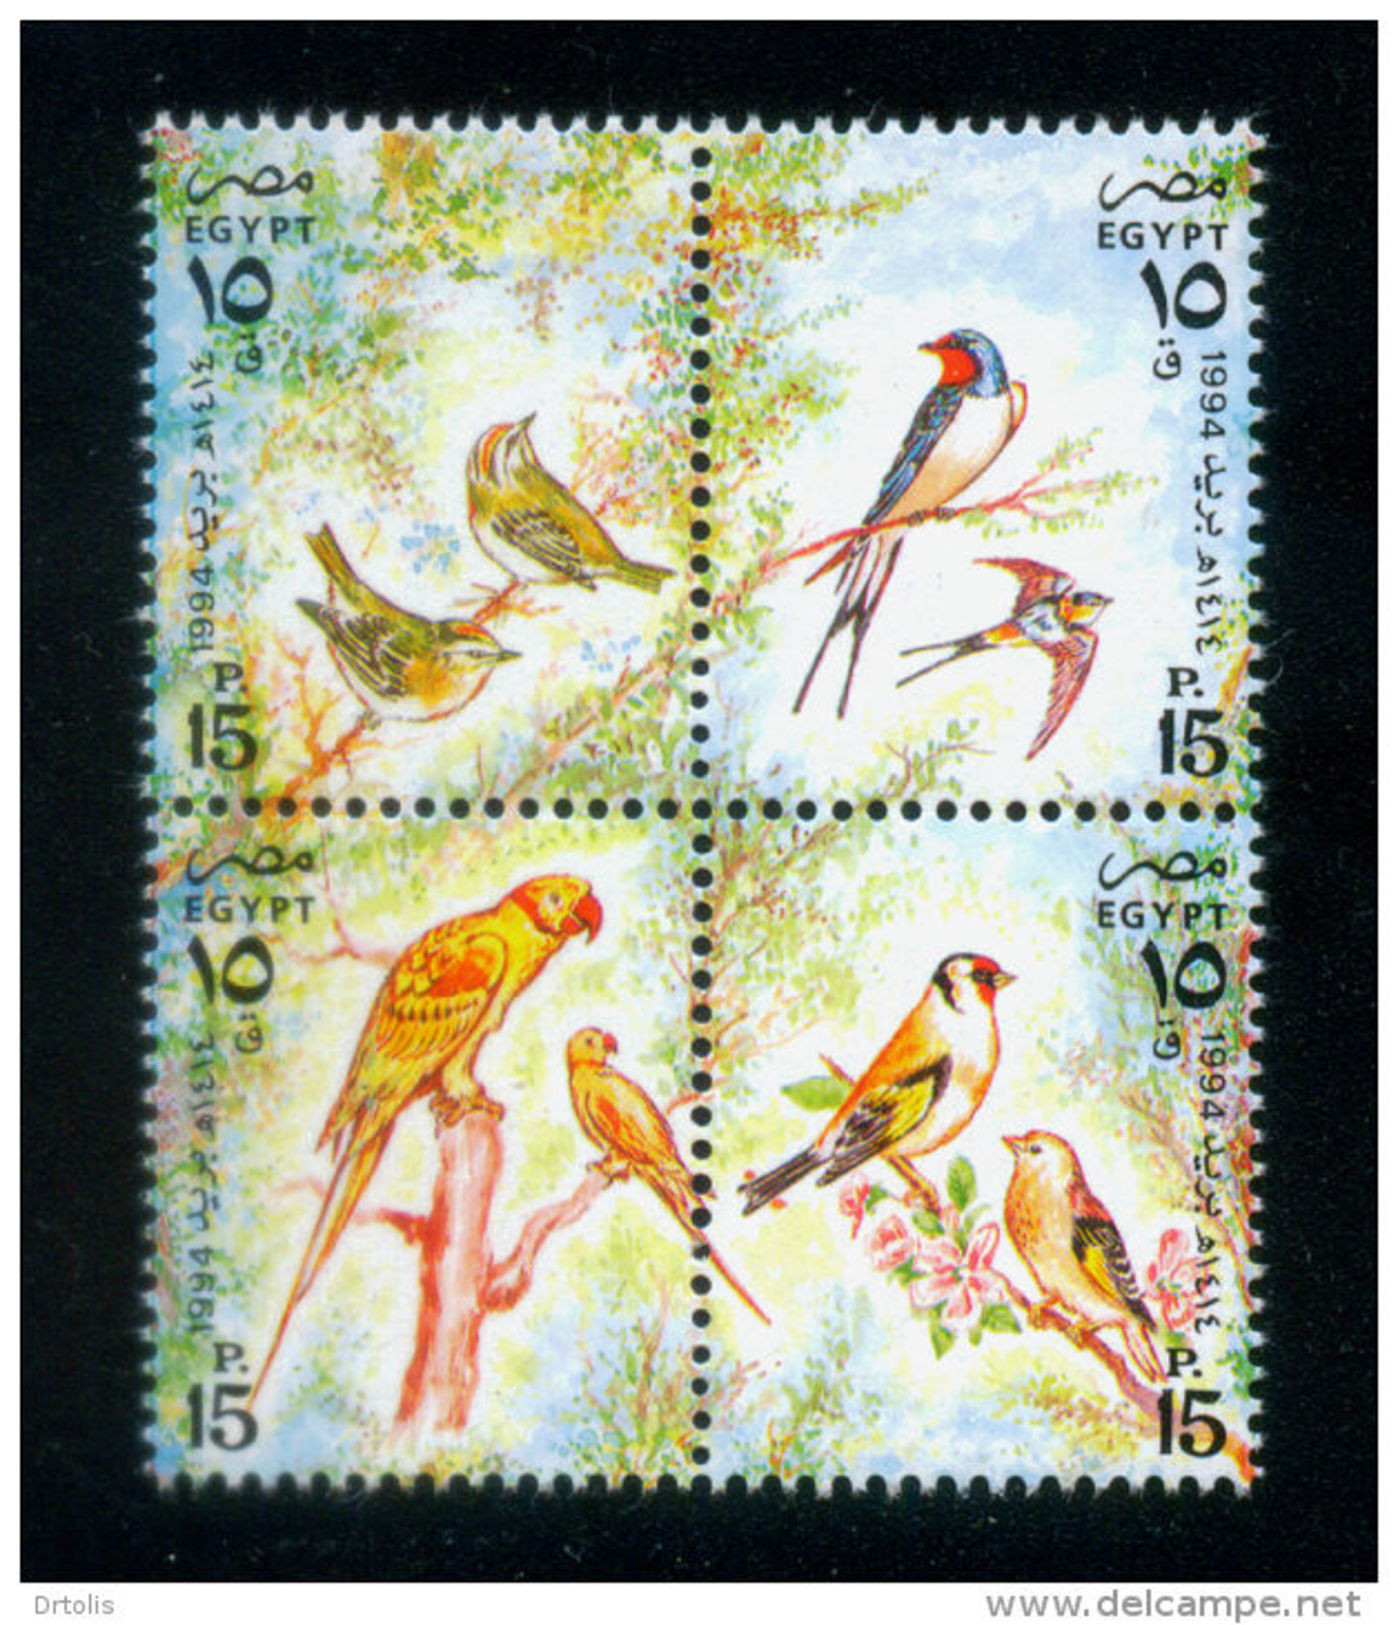 EGYPT / 1994 / COMPLETE YEAR ISSUES / MNH / VF/ 11 SCANS